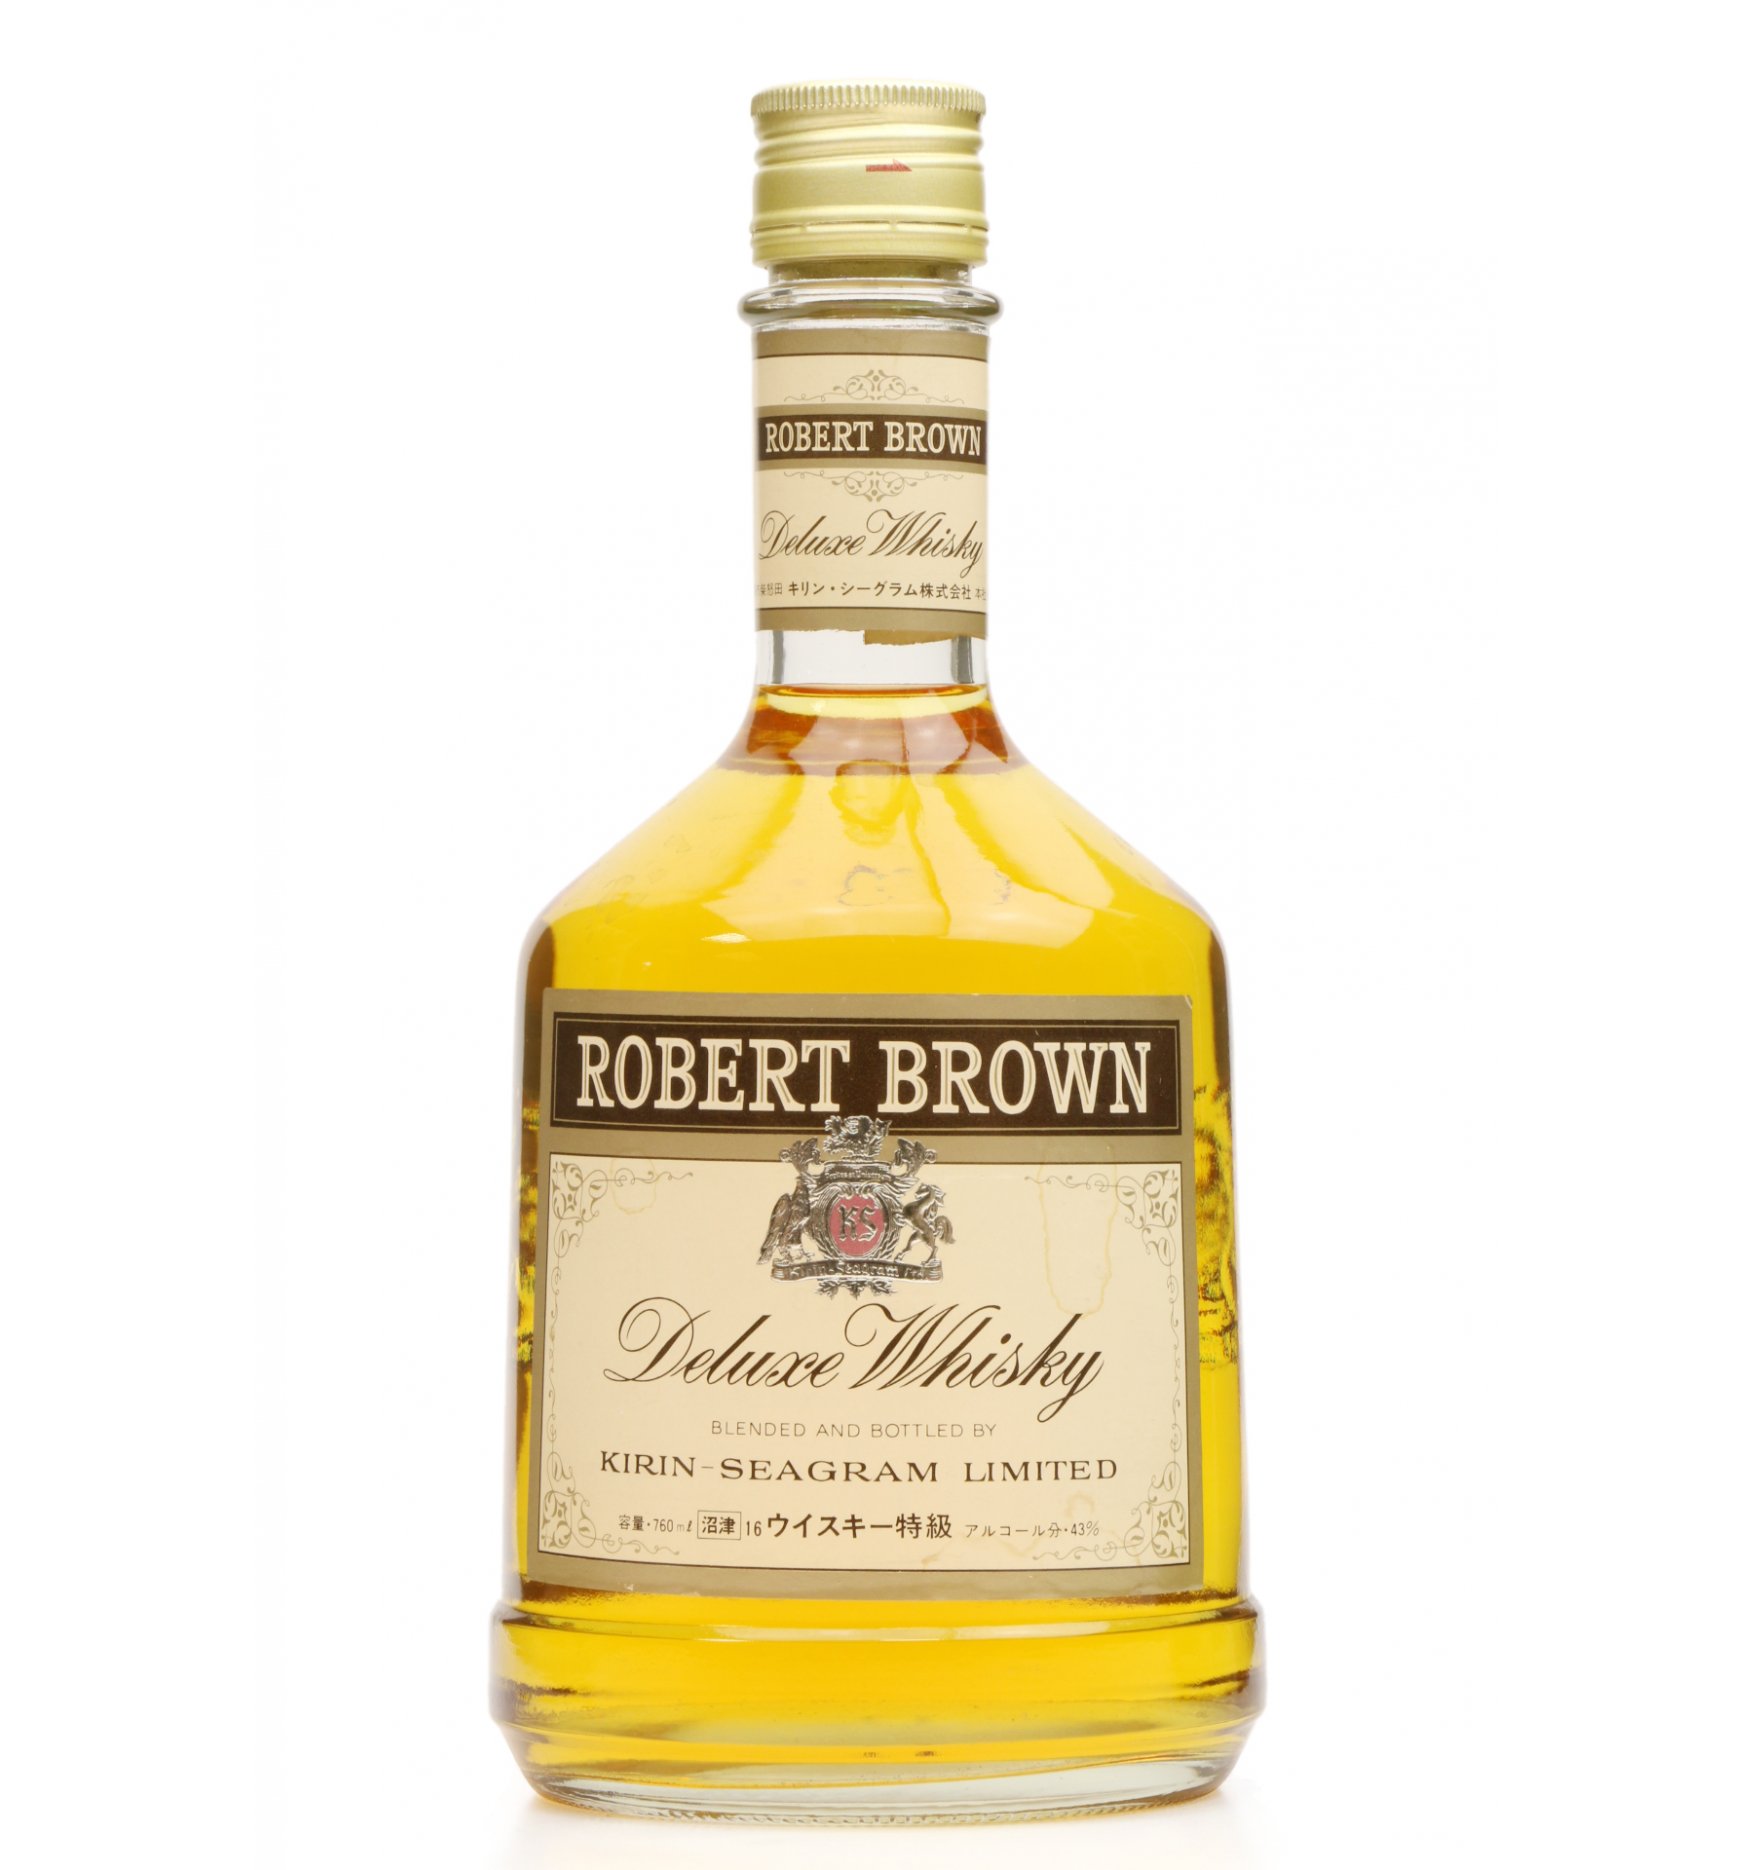 Robert Brown Deluxe Whisky - Kirin-Seagram - Just Whisky Auctions